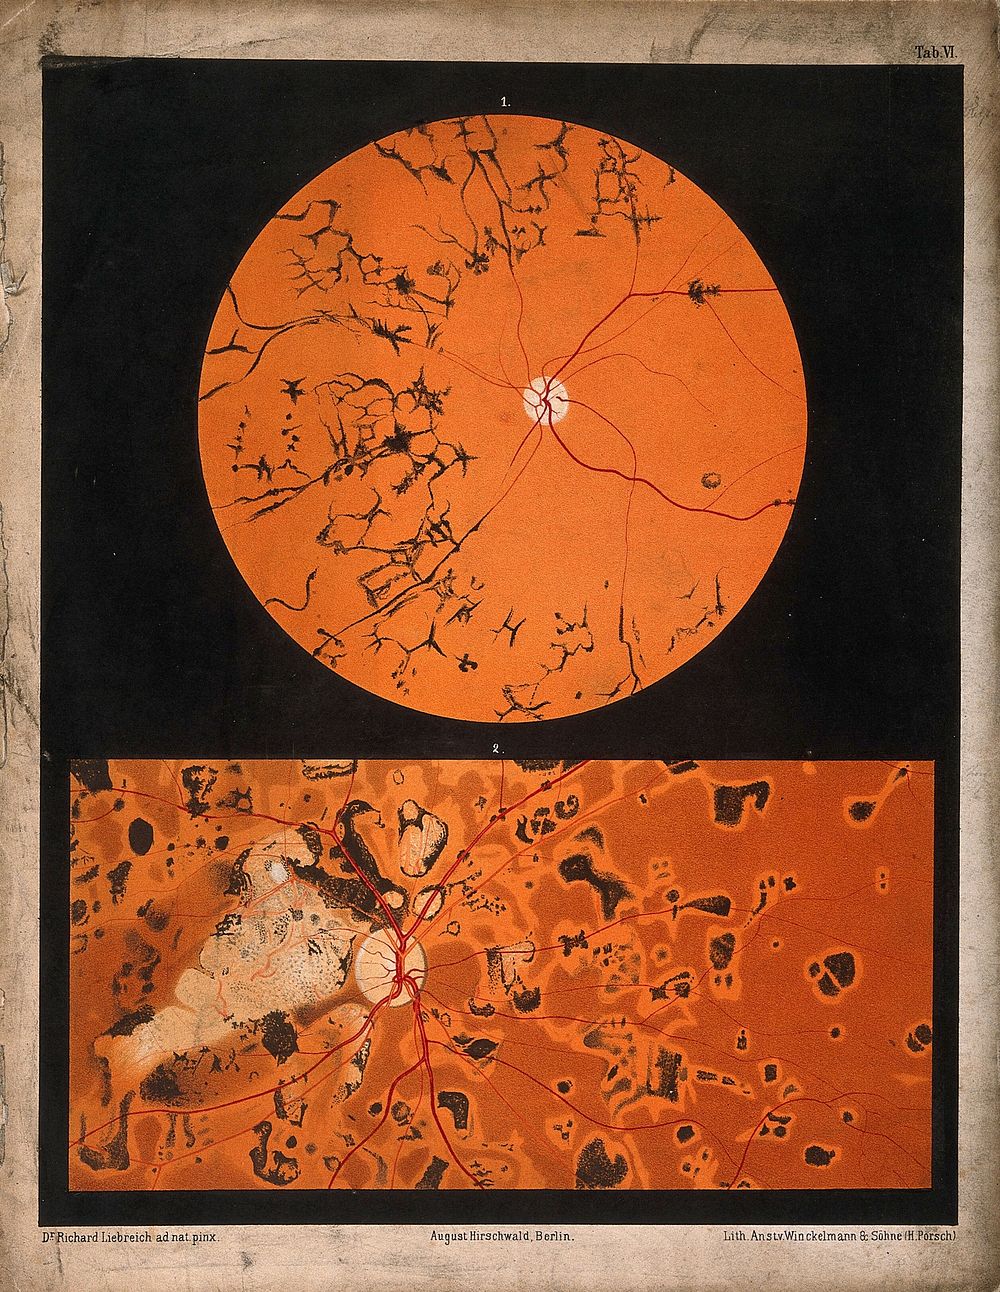 The eye, as seen through a microscope: two figures. Colour lithograph after R. Liebreich, ca. 1860.